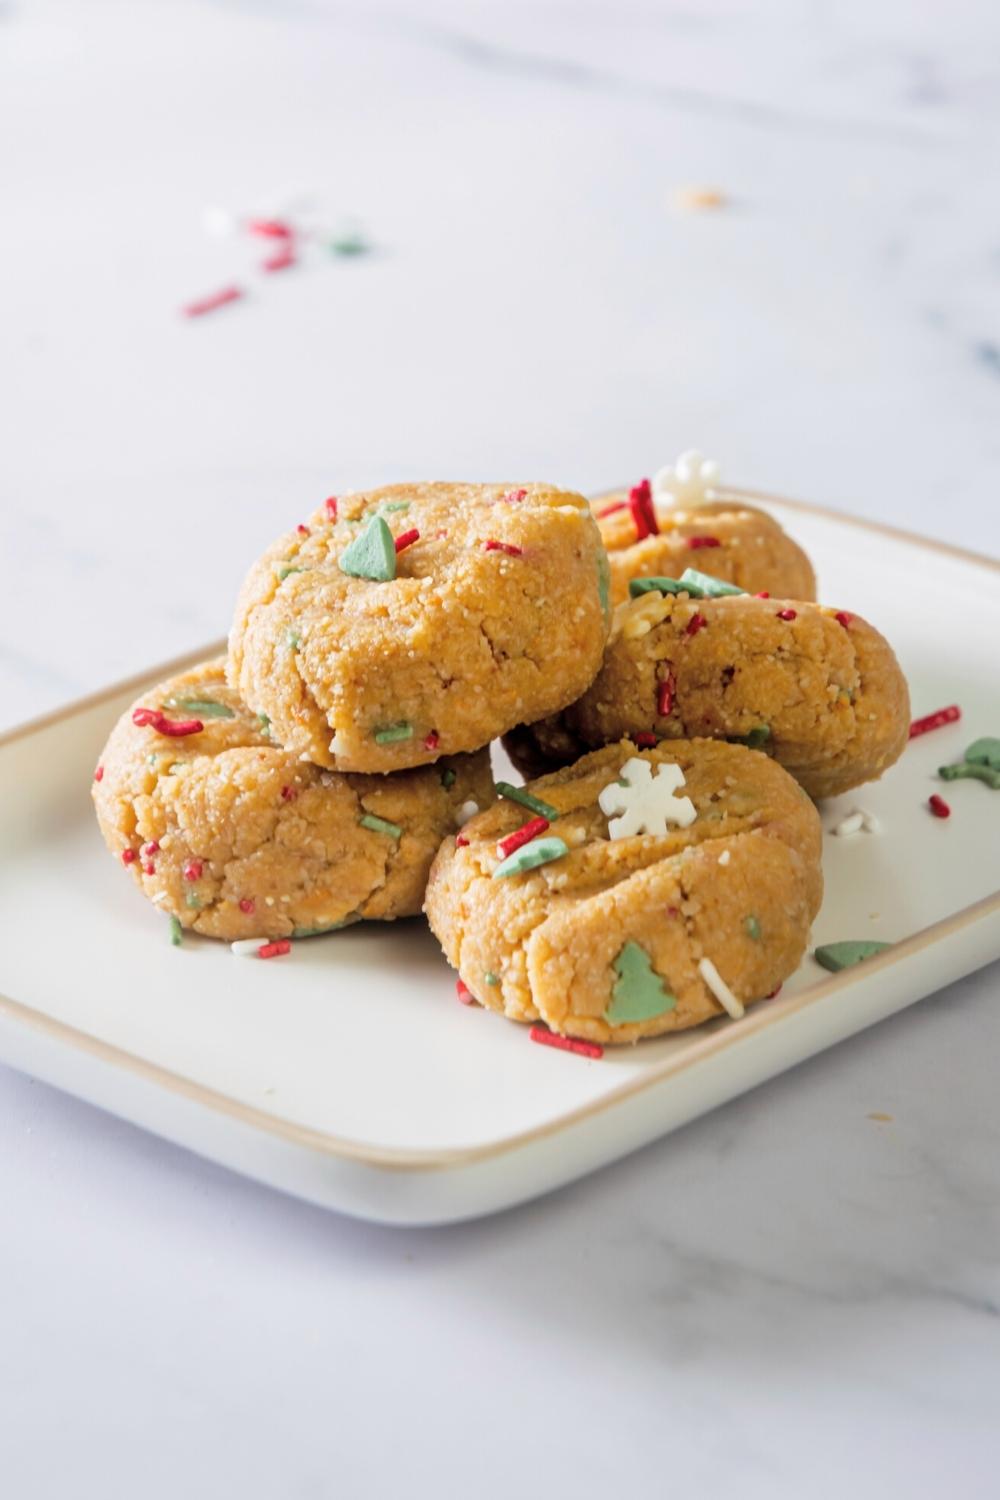 Five no bake peanut butter cookies with red, white, and green sprinkles in them on a white plate.